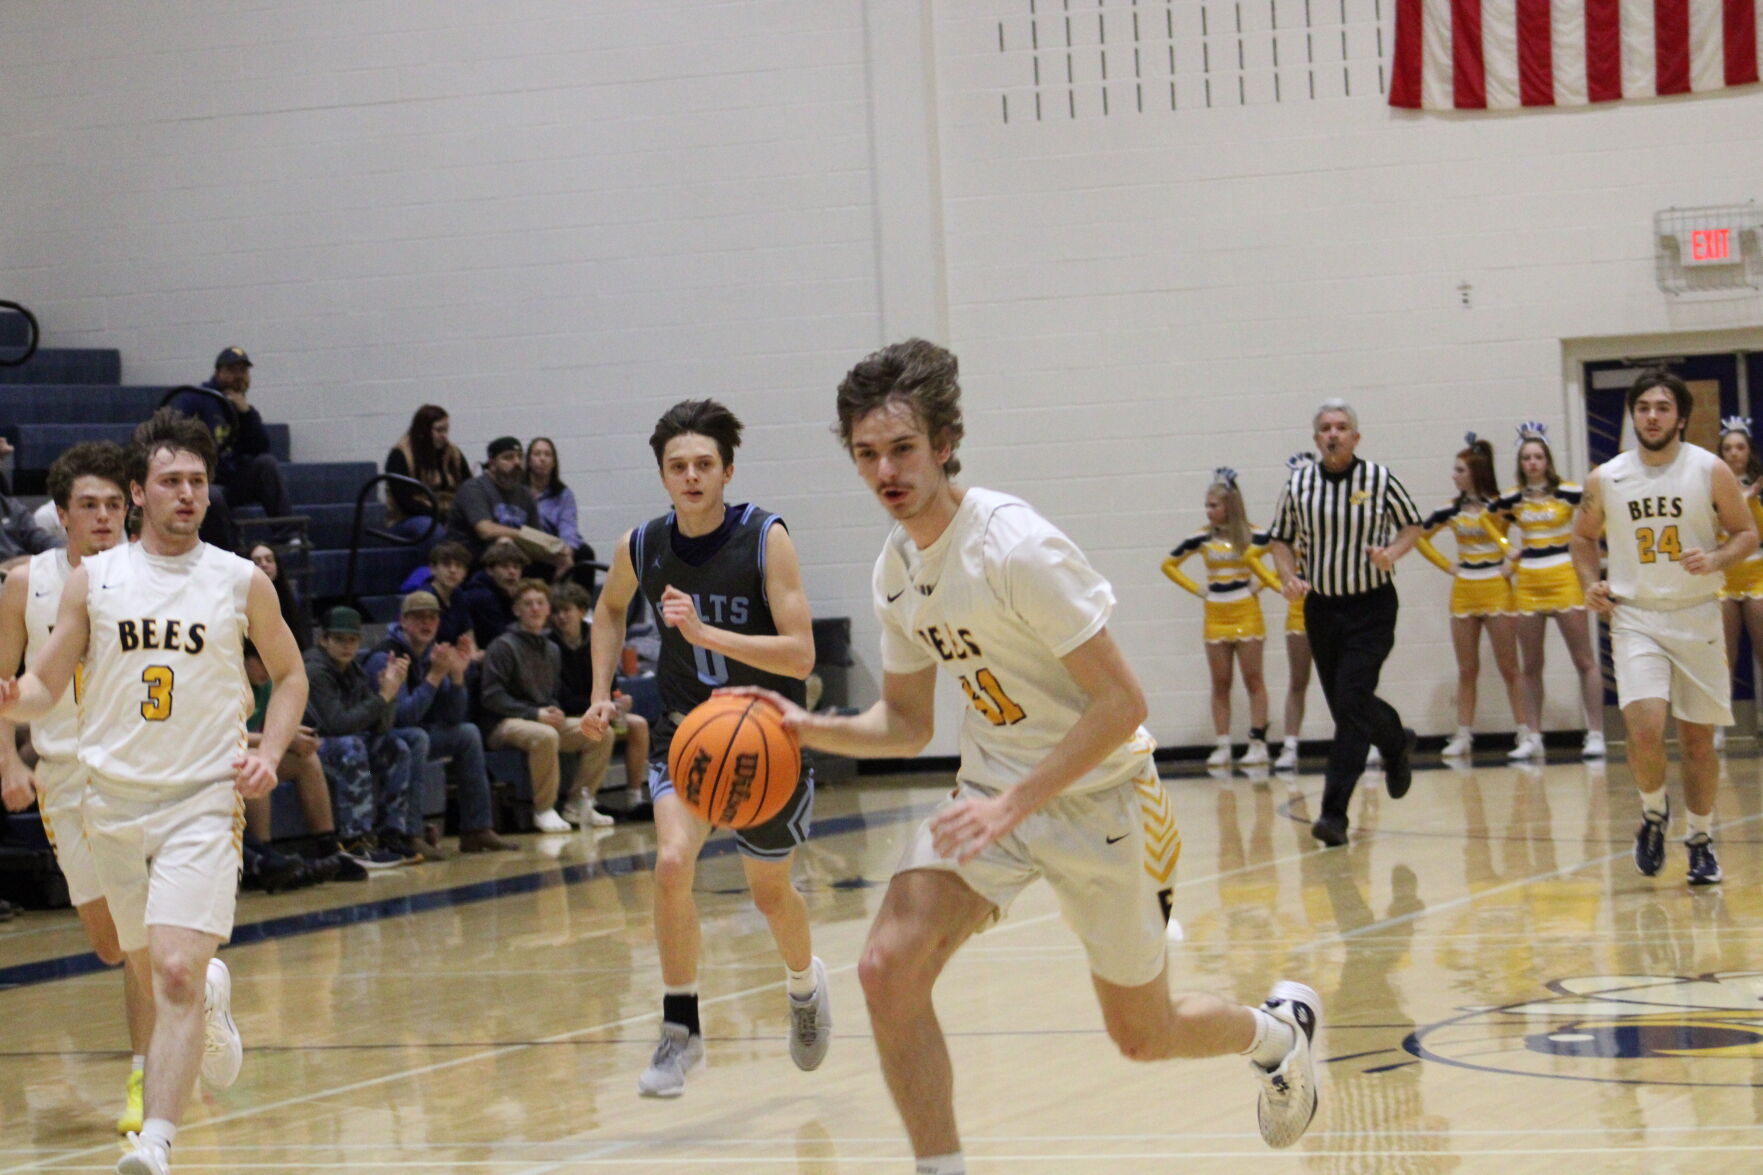 Blake Hunt shines as East Fairmont cruises to a 54-point victory in Big X Conference Game